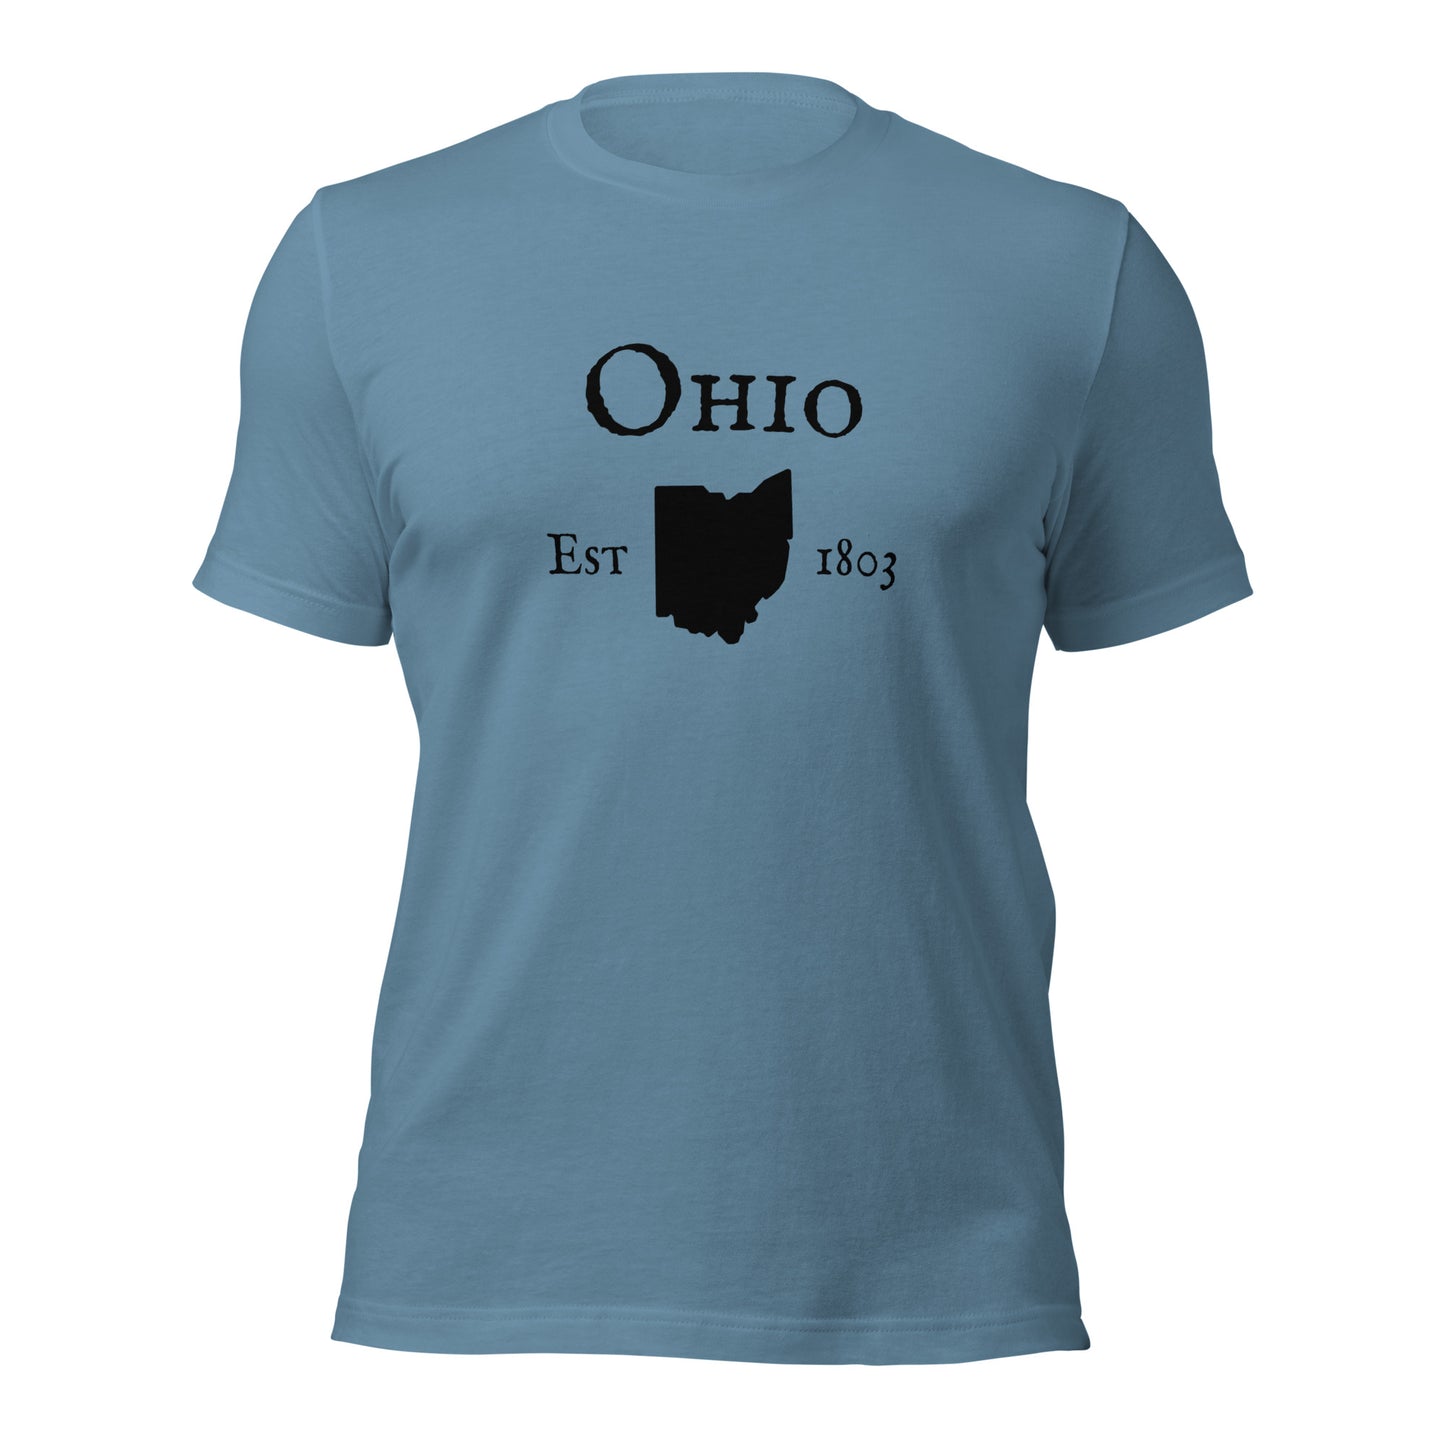 "Ohio Established In 1803" T-Shirt - Weave Got Gifts - Unique Gifts You Won’t Find Anywhere Else!